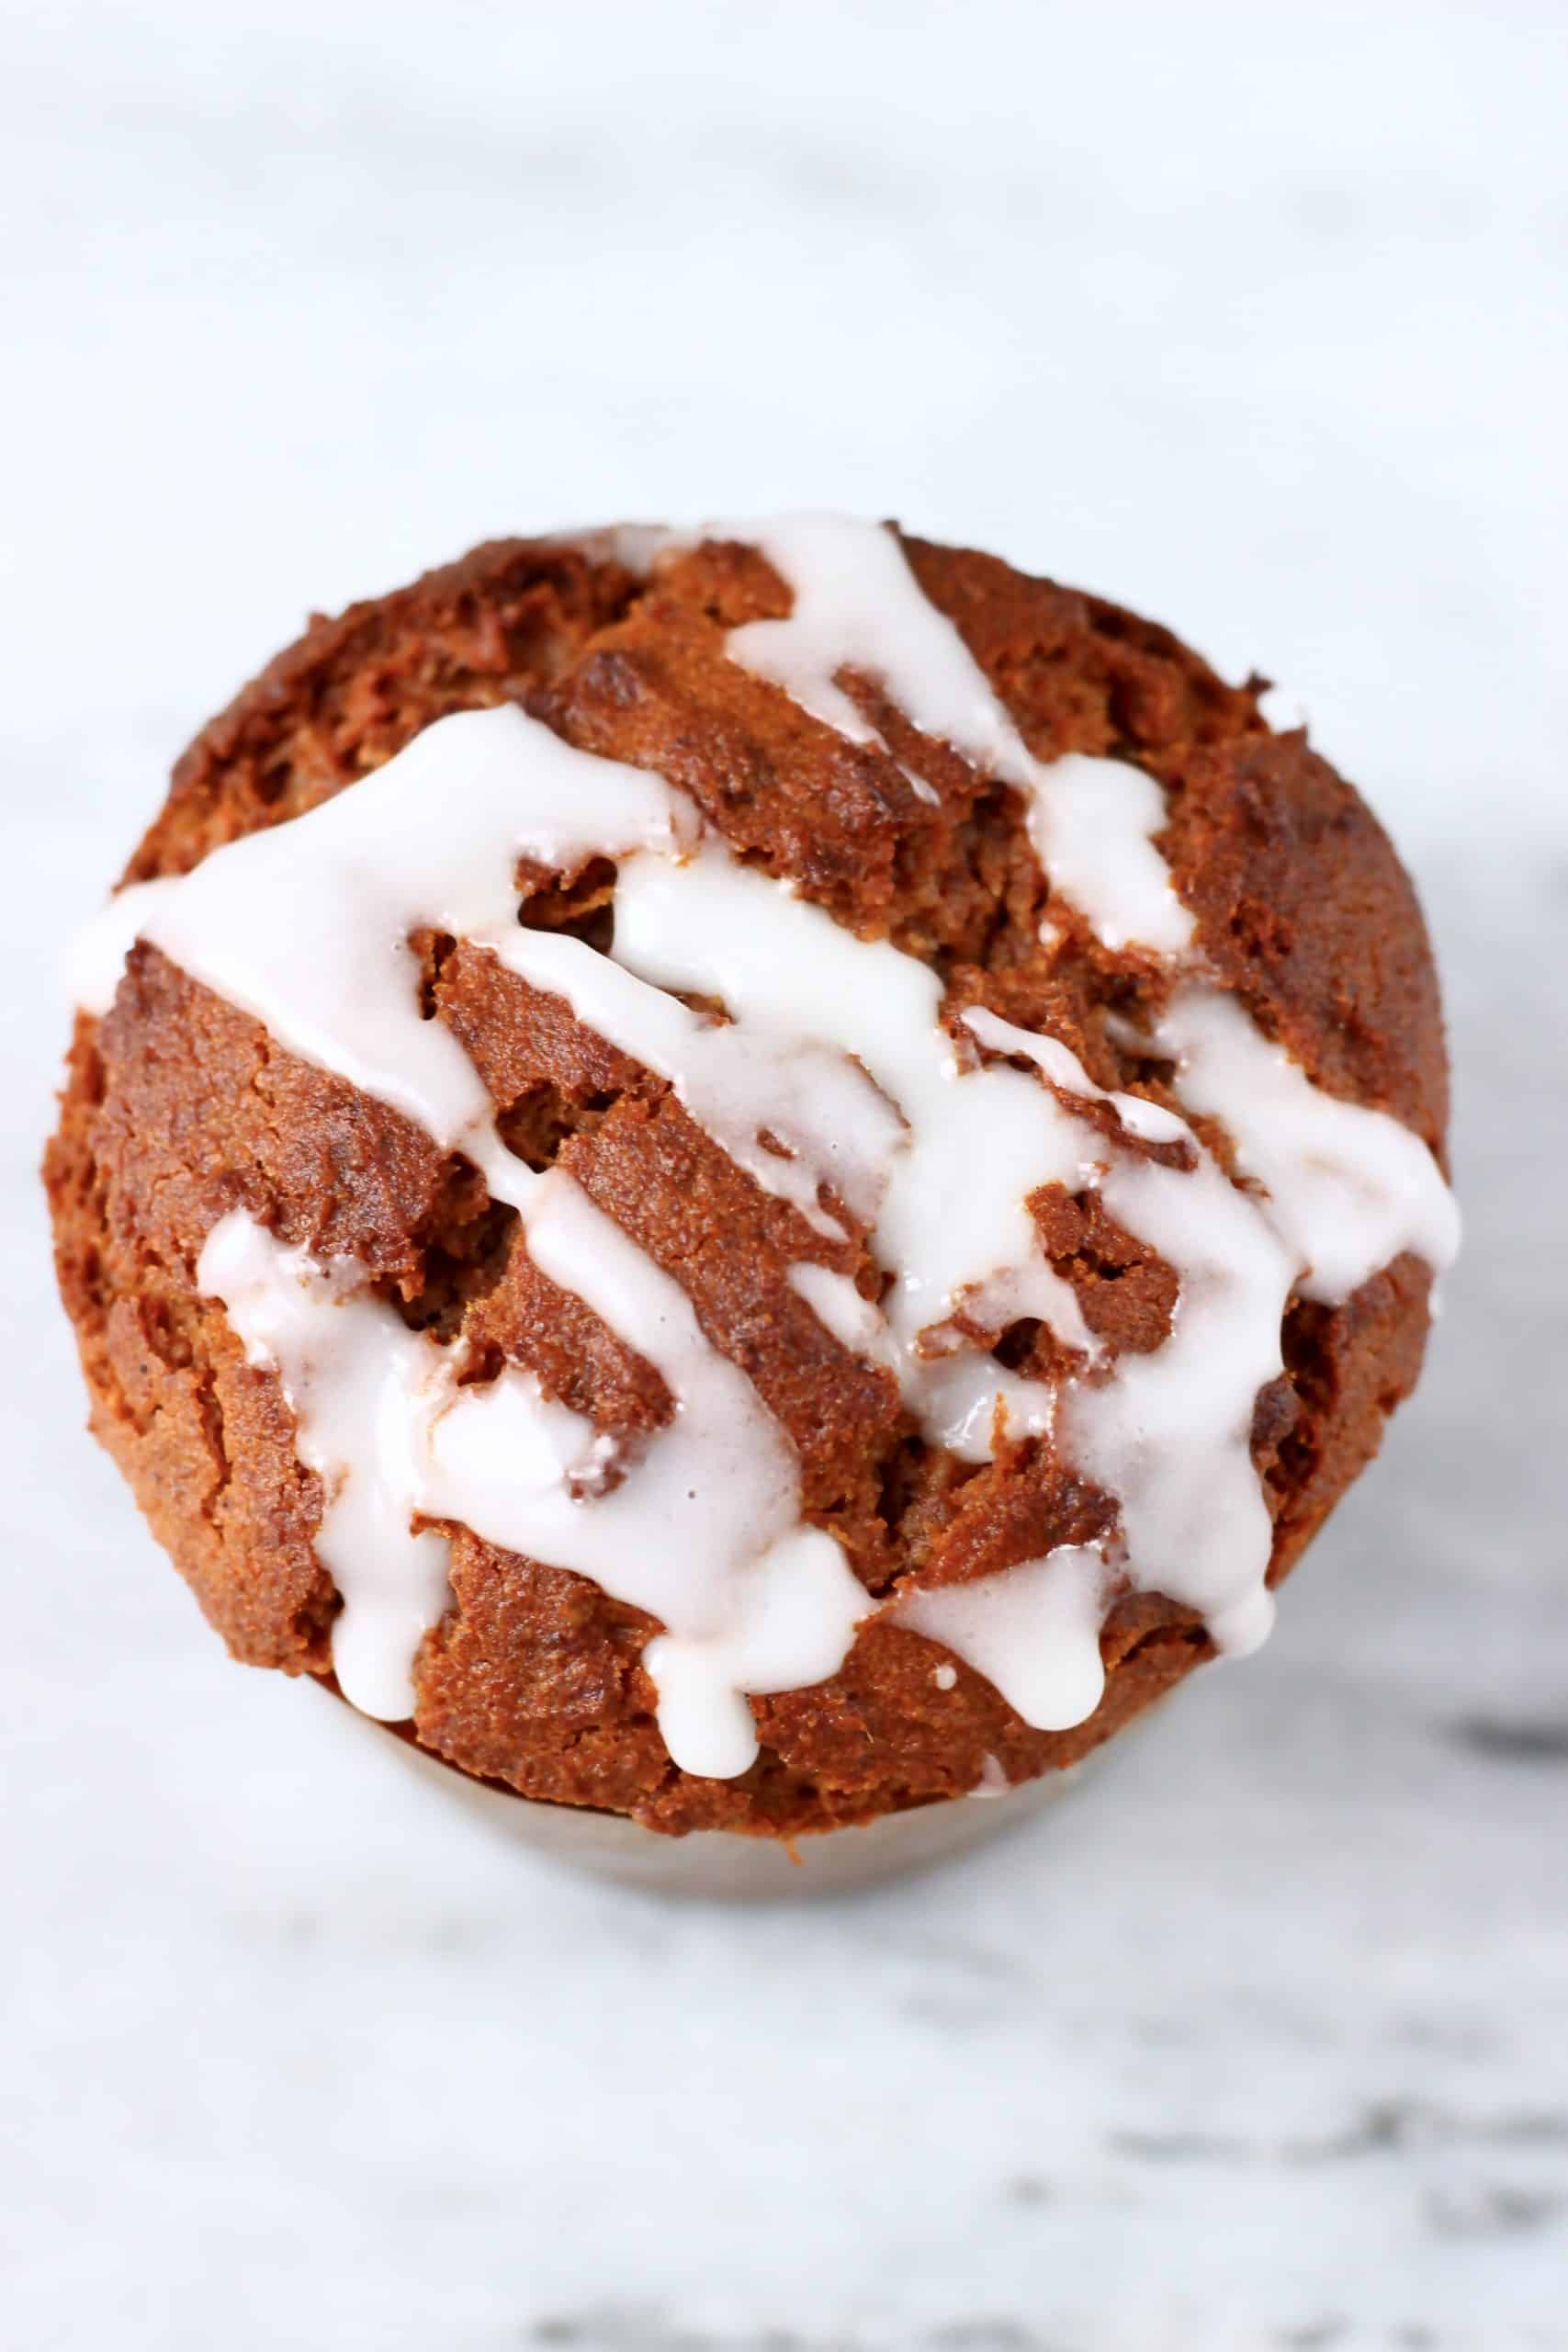 A gluten-free vegan gingerbread muffin in a brown muffin case drizzled with icing